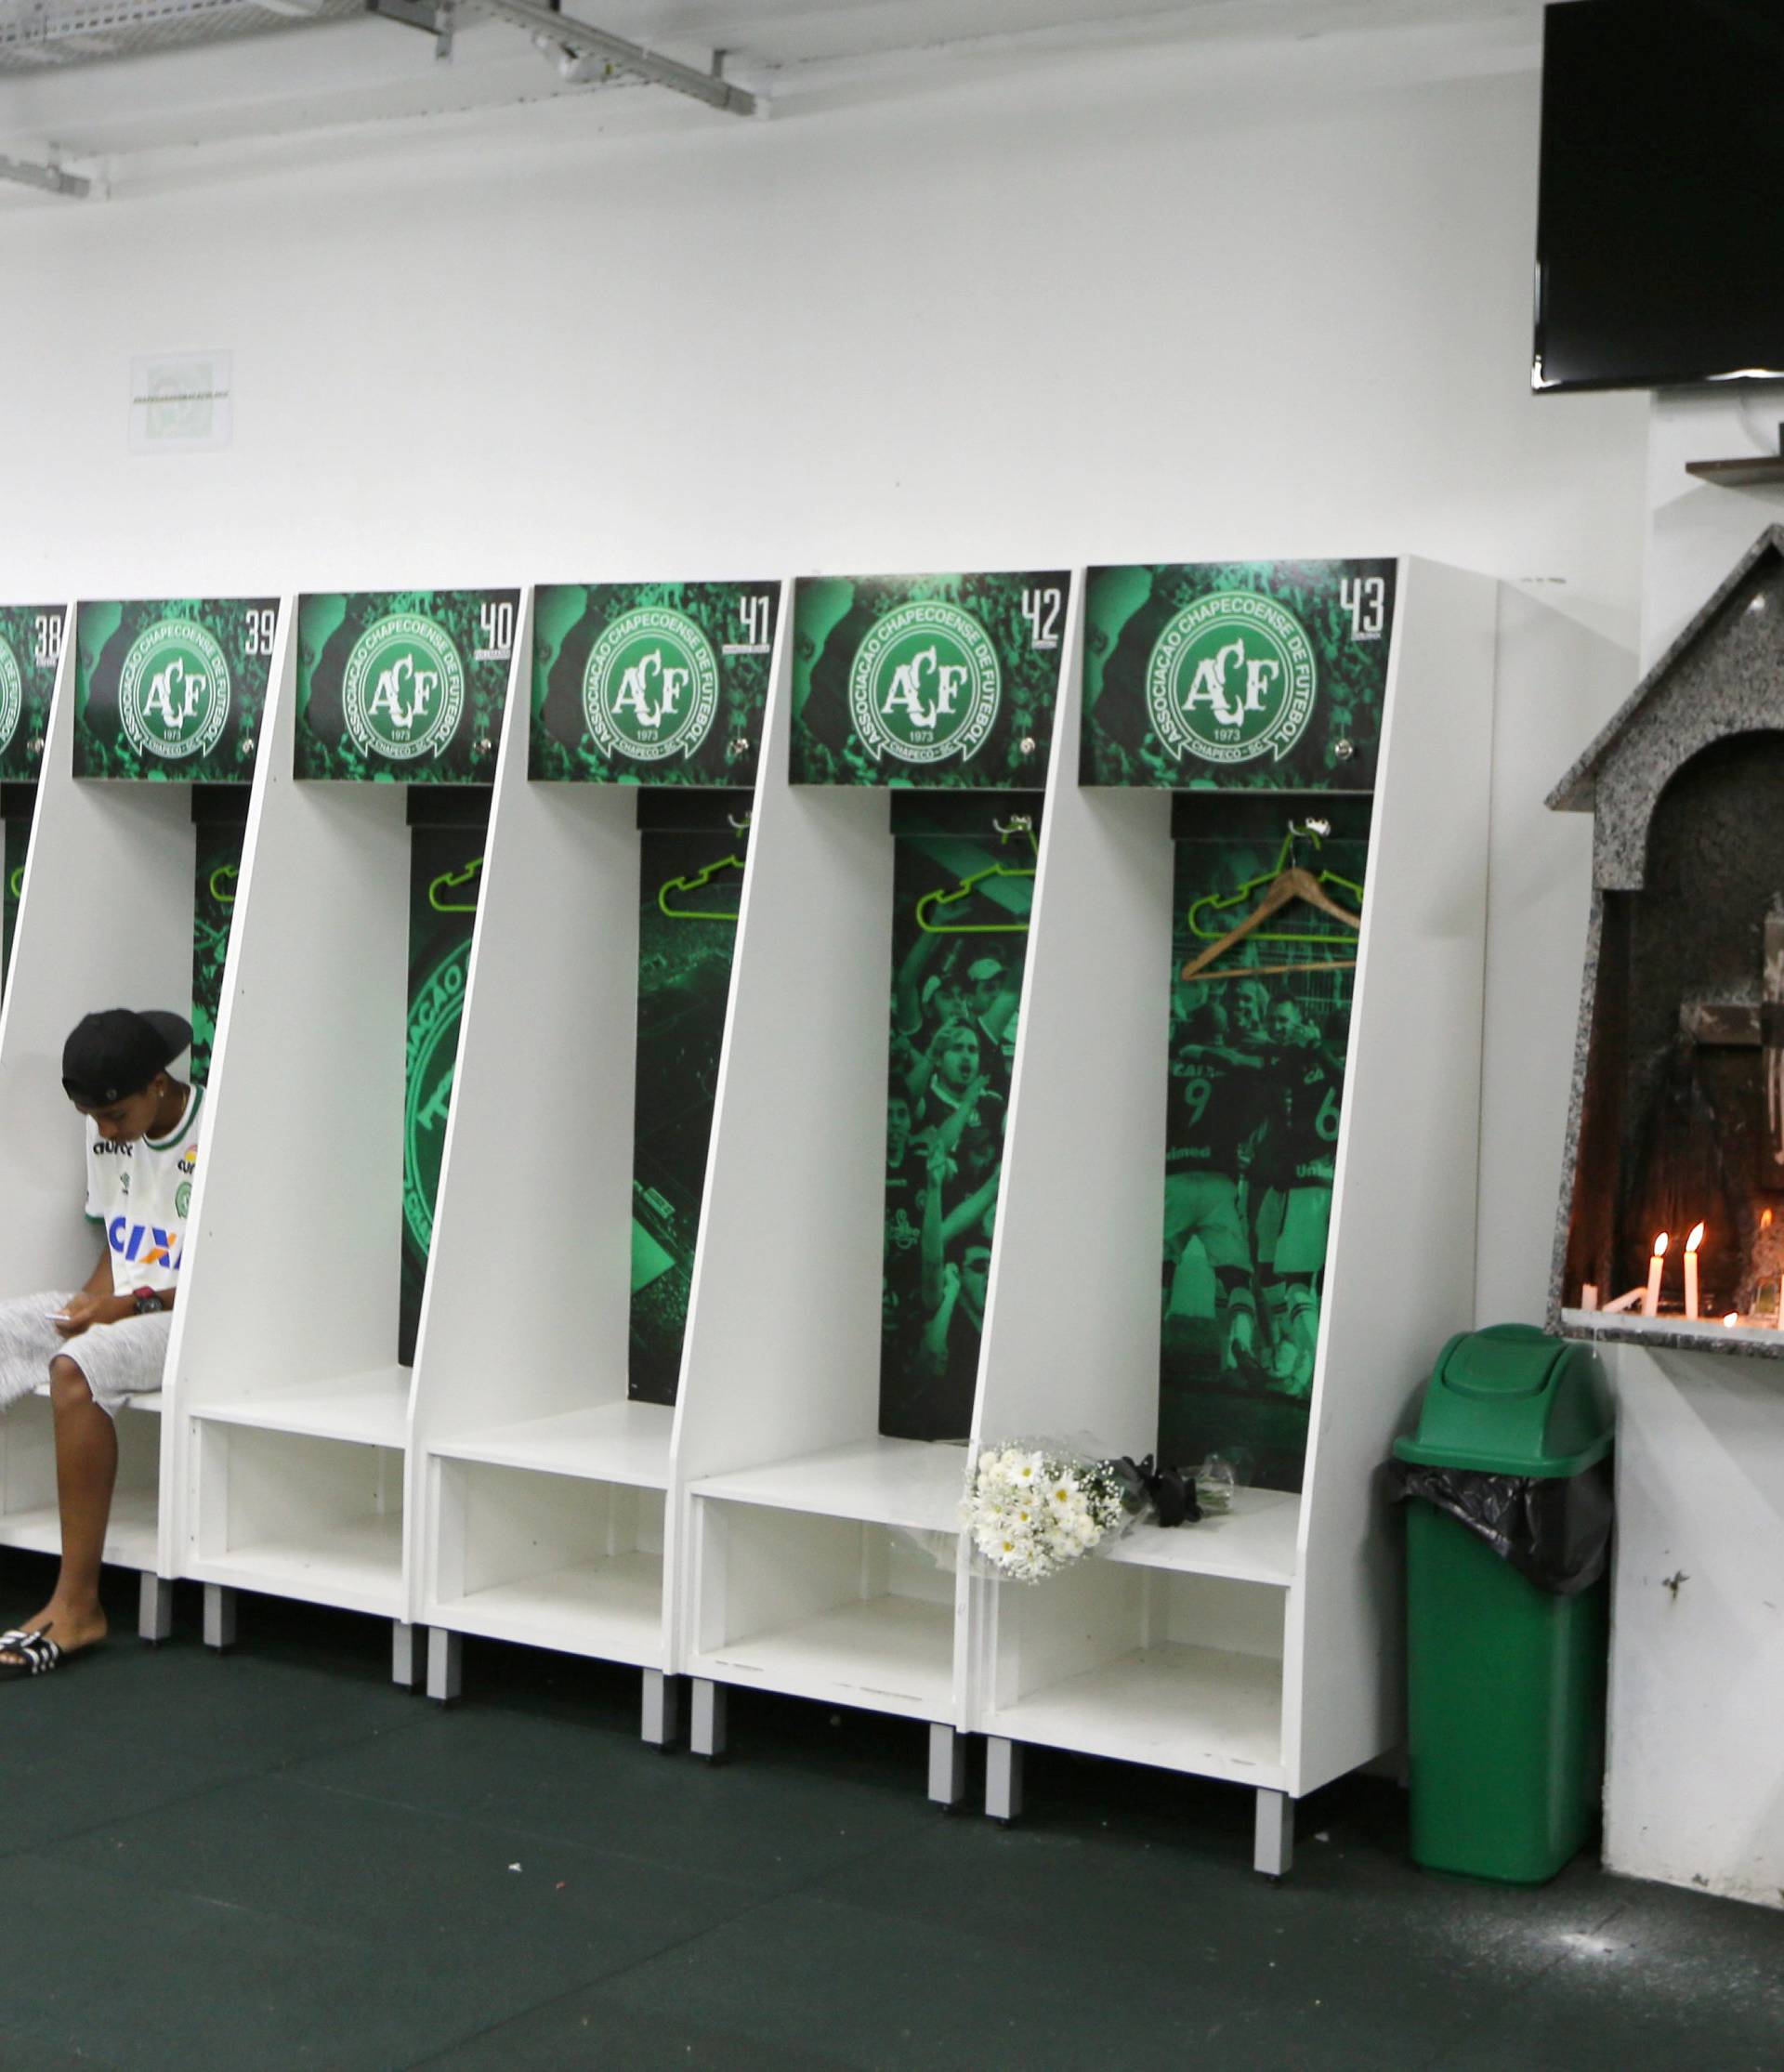 Leandro Bastos player of Chapecoense's under-15 soccer team sits inside the team's locker room at the Arena Conda stadium in Chapeco